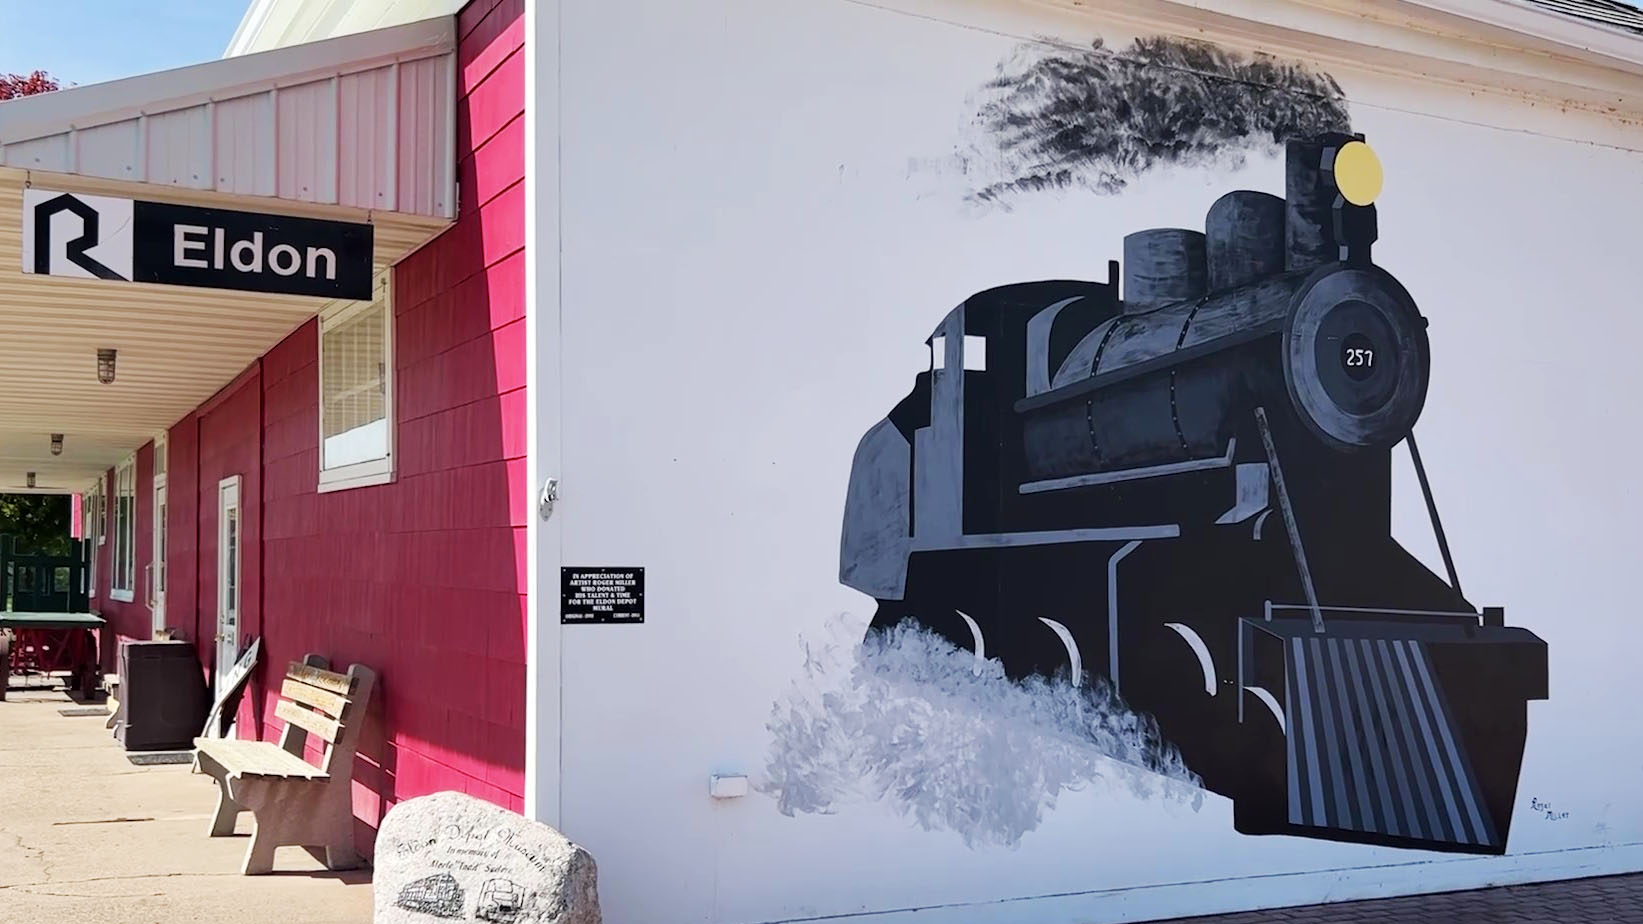 The outside view of the Rock Island Train Depot in Eldon, Iowa showing a mural of a train.